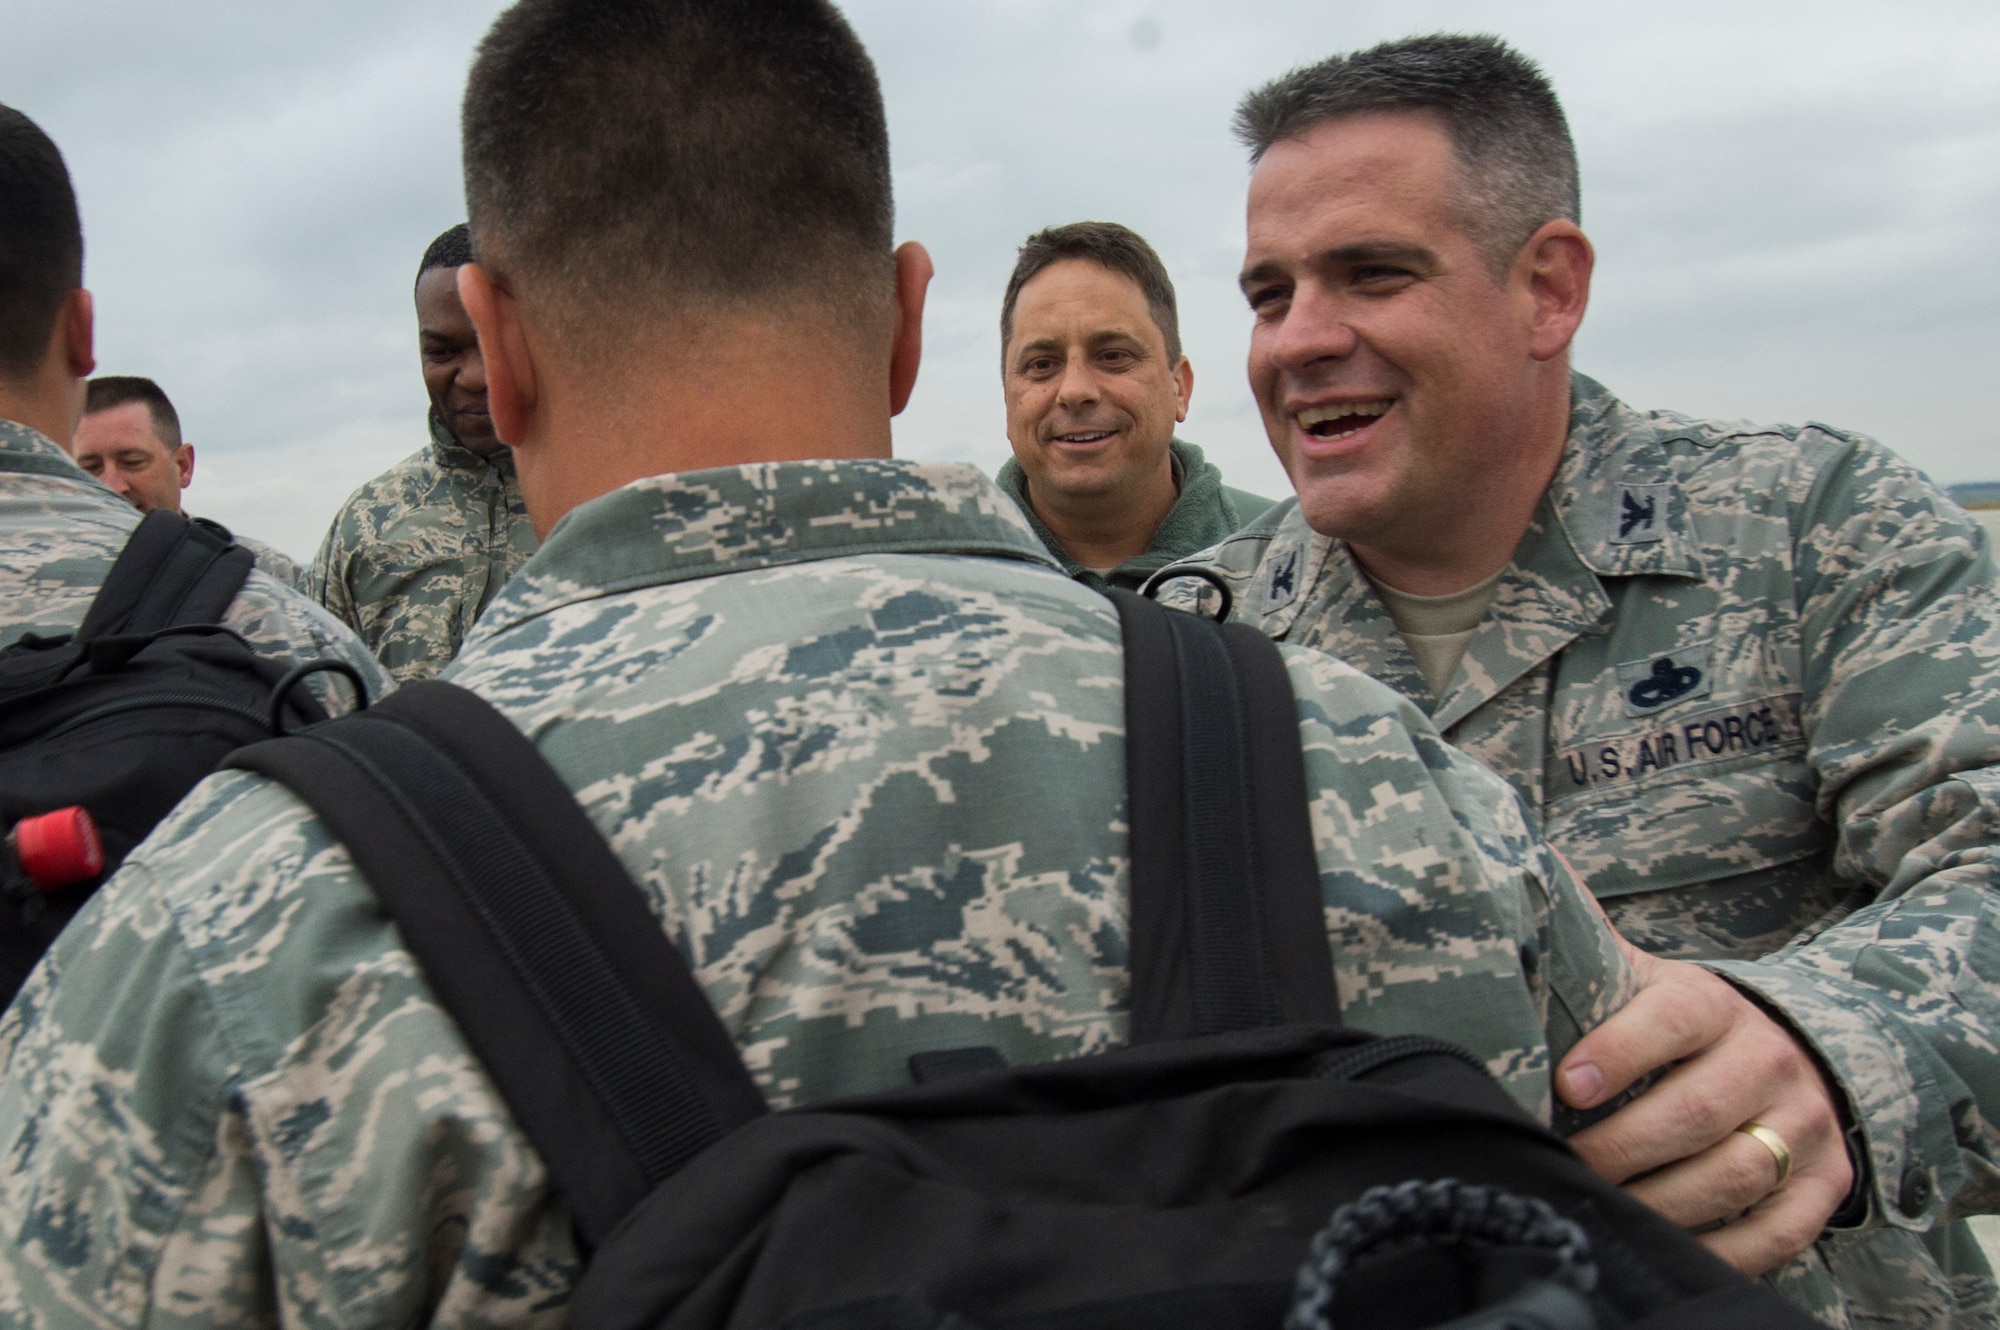 Col. Stephen Scherzer, 52nd Maintenance Group commander, right, greets an Airman assigned to the 480th Expeditionary Fighter Squadron during the squadron’s return to Spangdahlem Air Base, Germany, Oct. 12, 2016. Approximately 300 of the Airmen, who serve in flight, maintenance or support roles for the F-16 Fighting Falcon fighter aircraft, completed a six-month deployment to Southwest Asia by providing close air support and dynamic targeting operations as part of the squadron’s first deployment in support of Operation Inherent Resolve. Operation Inherent Resolve aims to eliminate the Da'esh terrorist group and the threat they pose to Iraq, Syria and the wider international community. (U.S. Air Force photo by Staff Sgt. Joe W. McFadden)